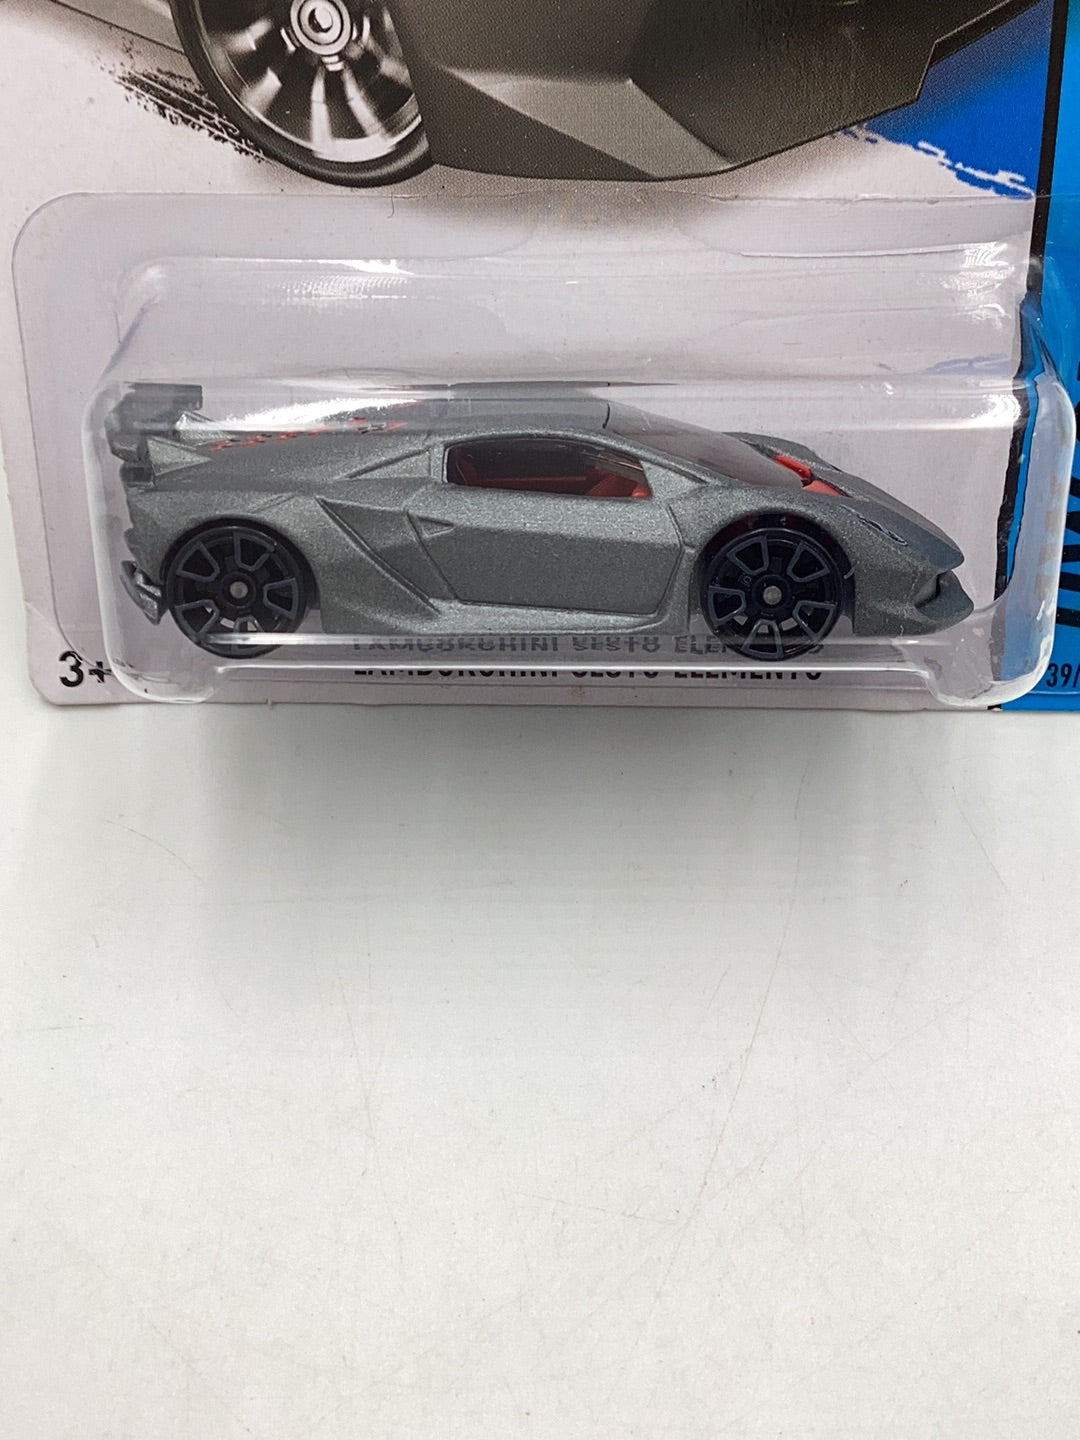 2014 hot wheels #164 Lamborghini Sesto Elemento Need for Speed with protector